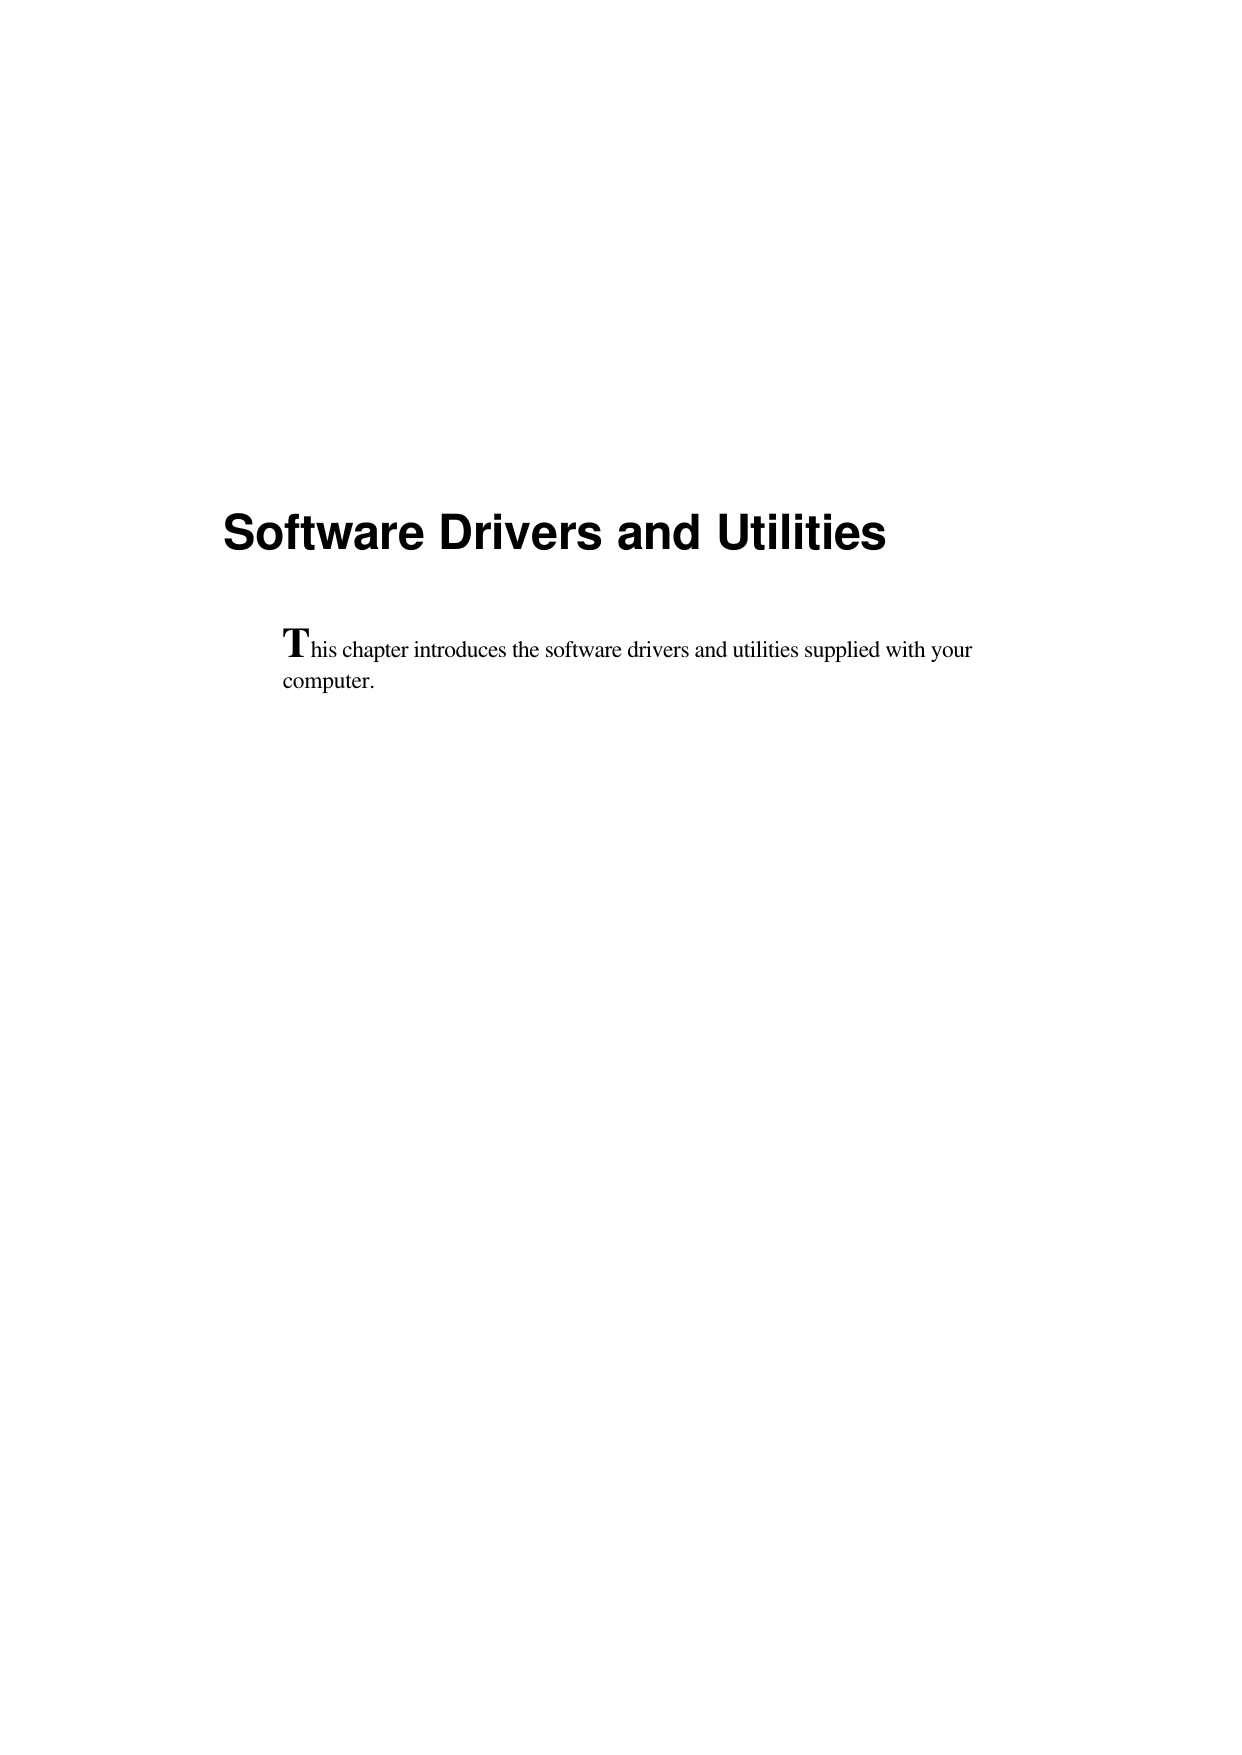 Software Drivers and UtilitiesThis chapter introduces the software drivers and utilities supplied with yourcomputer.